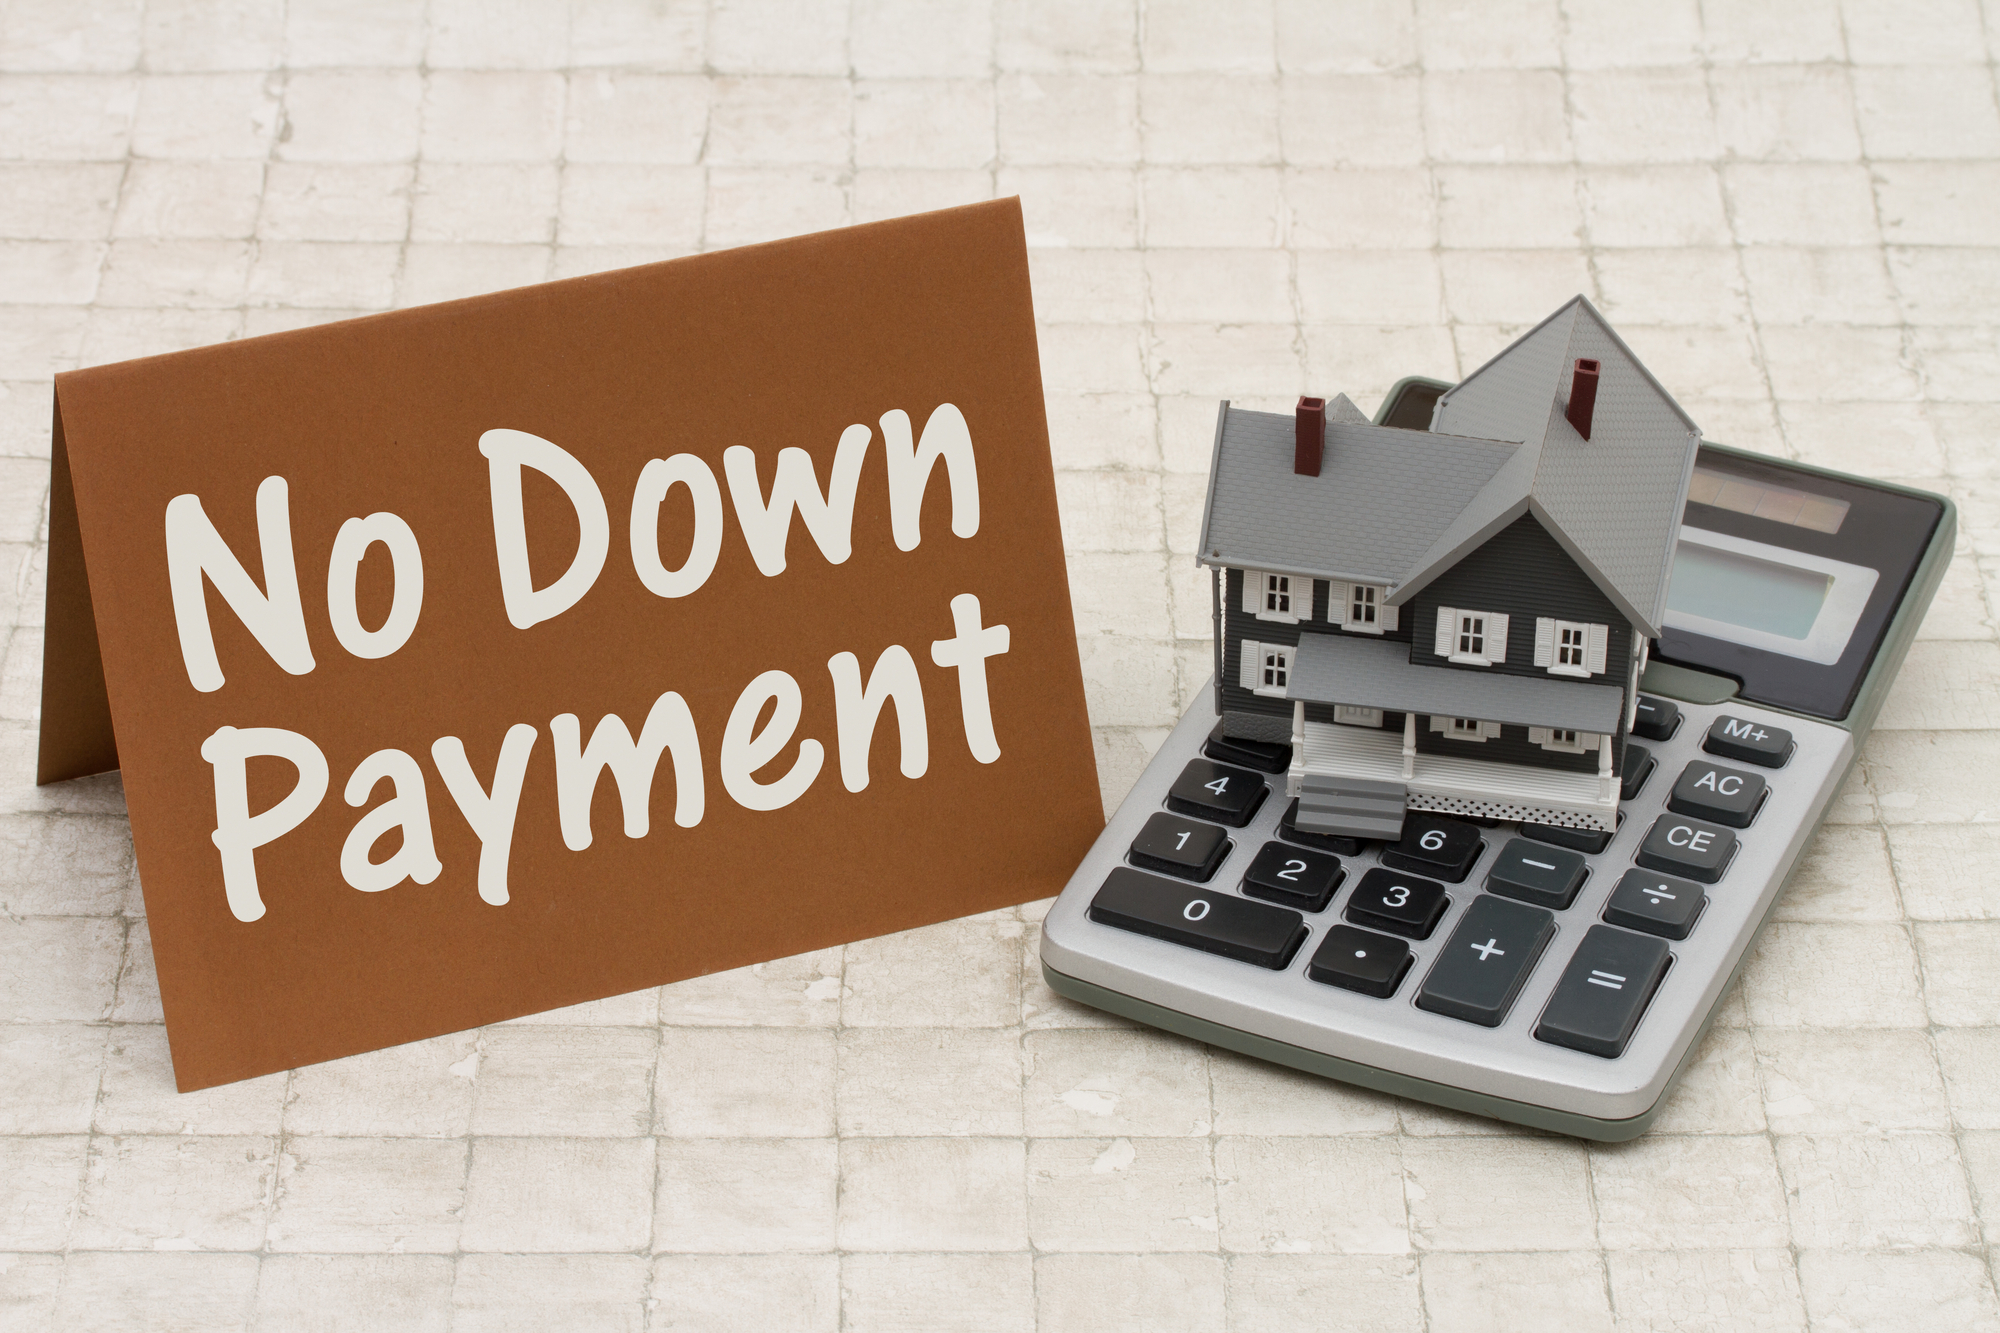 Home Mortgage No Down Payment, A gray house, brown card and calculator on stone background with text No Down Payment